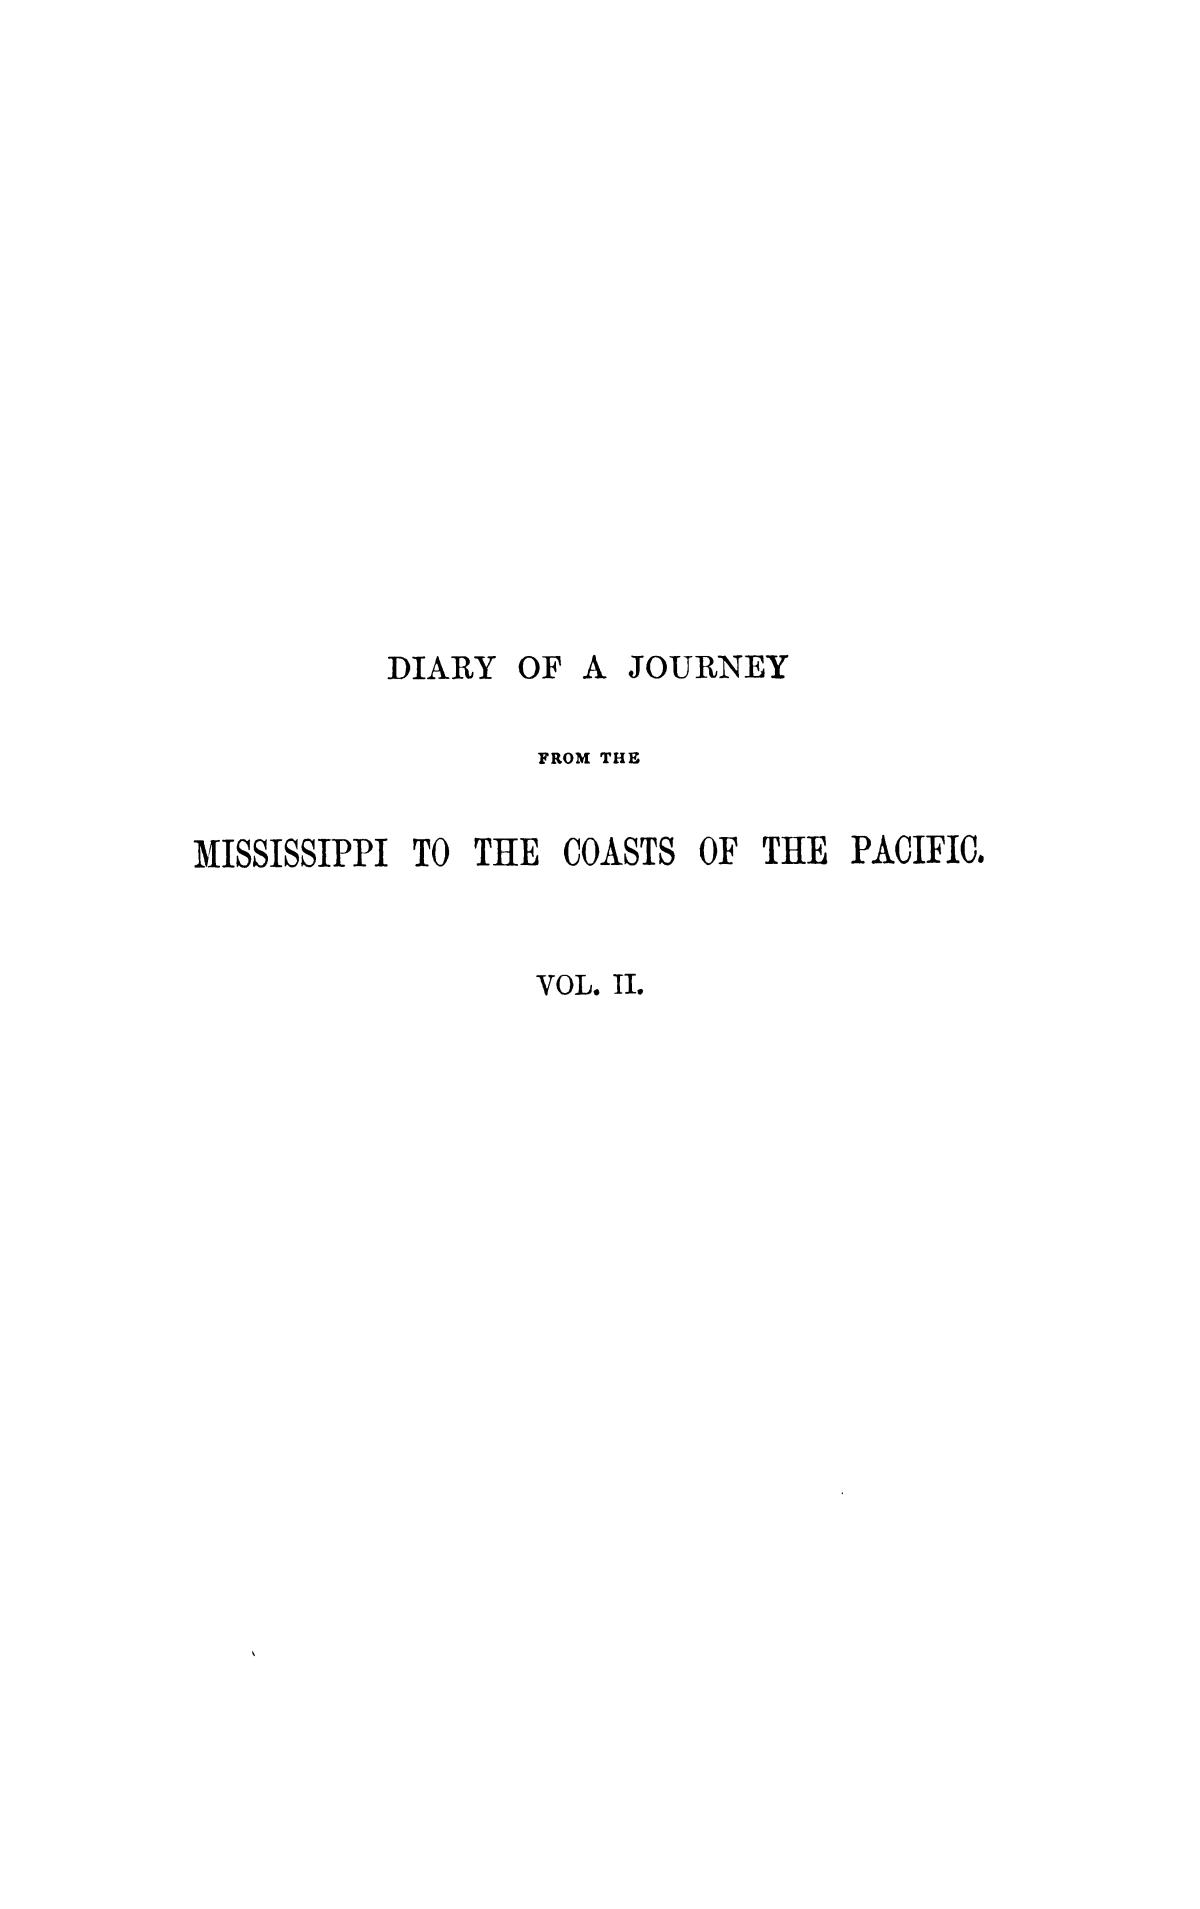 Diary of a Journey From the Mississippi to the Coasts of the Pacific With a United States Government Expedition: Volume 2
                                                
                                                    I
                                                